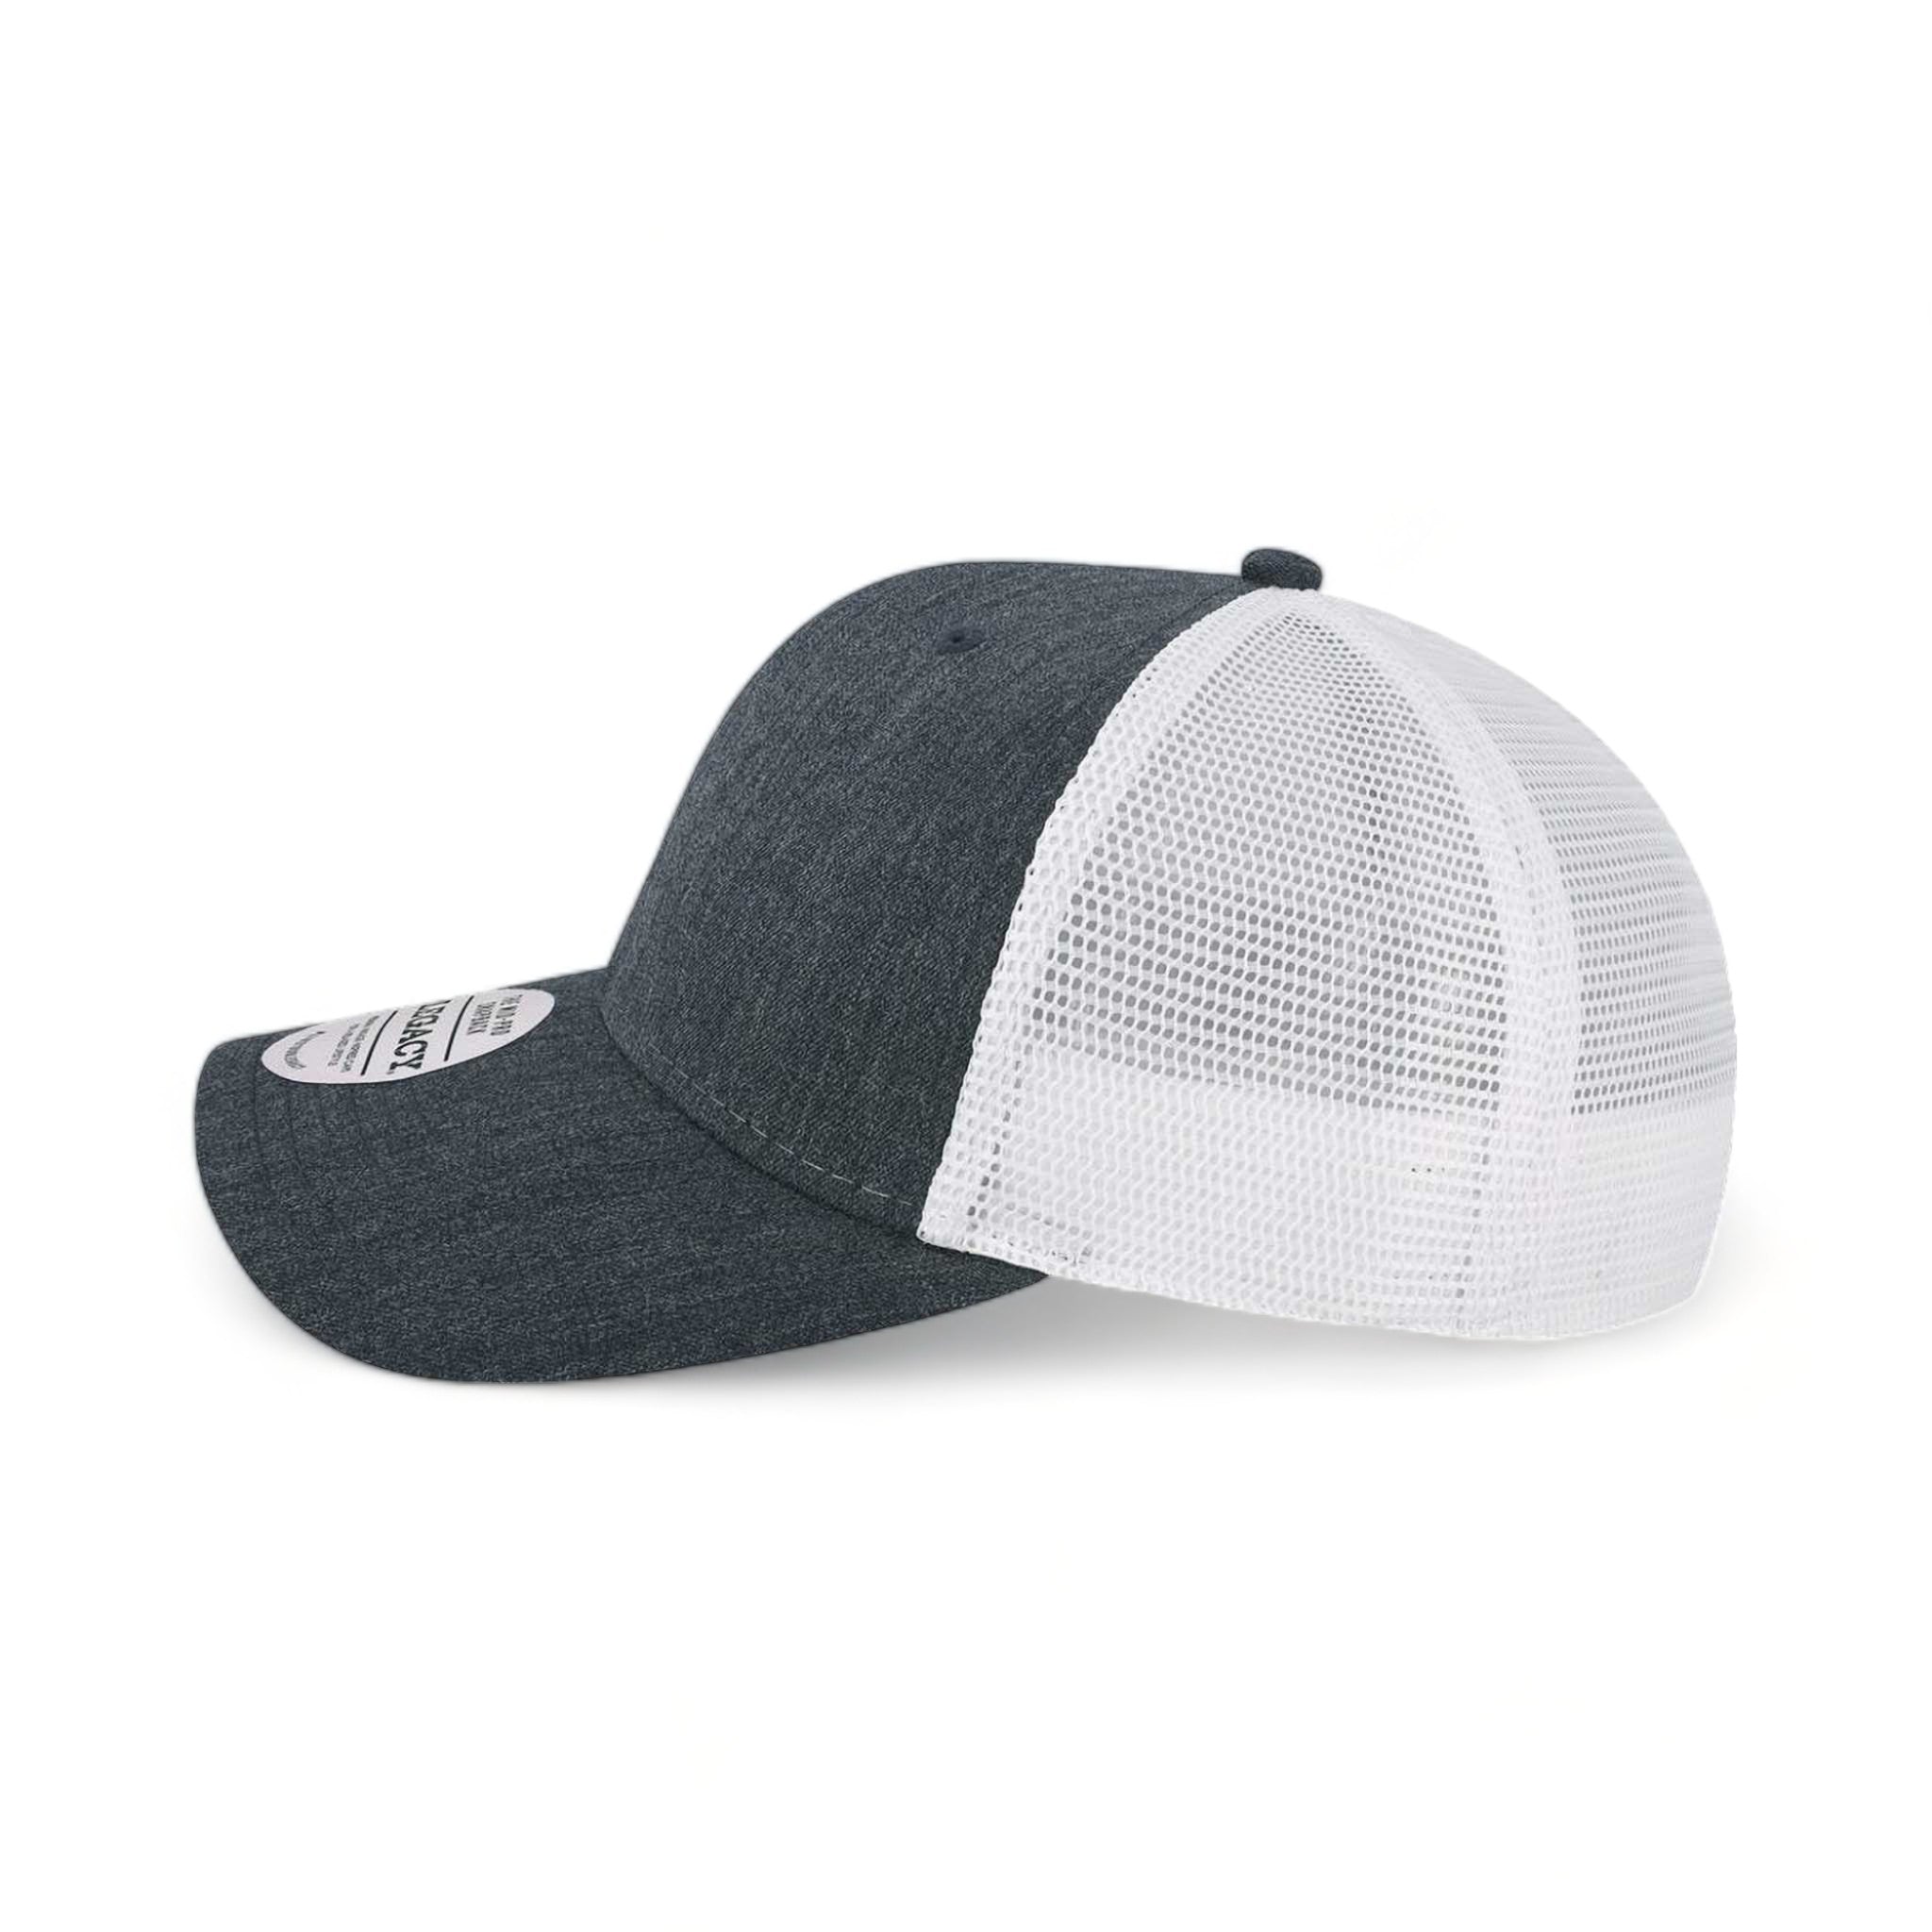 Side view of LEGACY MPS custom hat in mélange navy and white